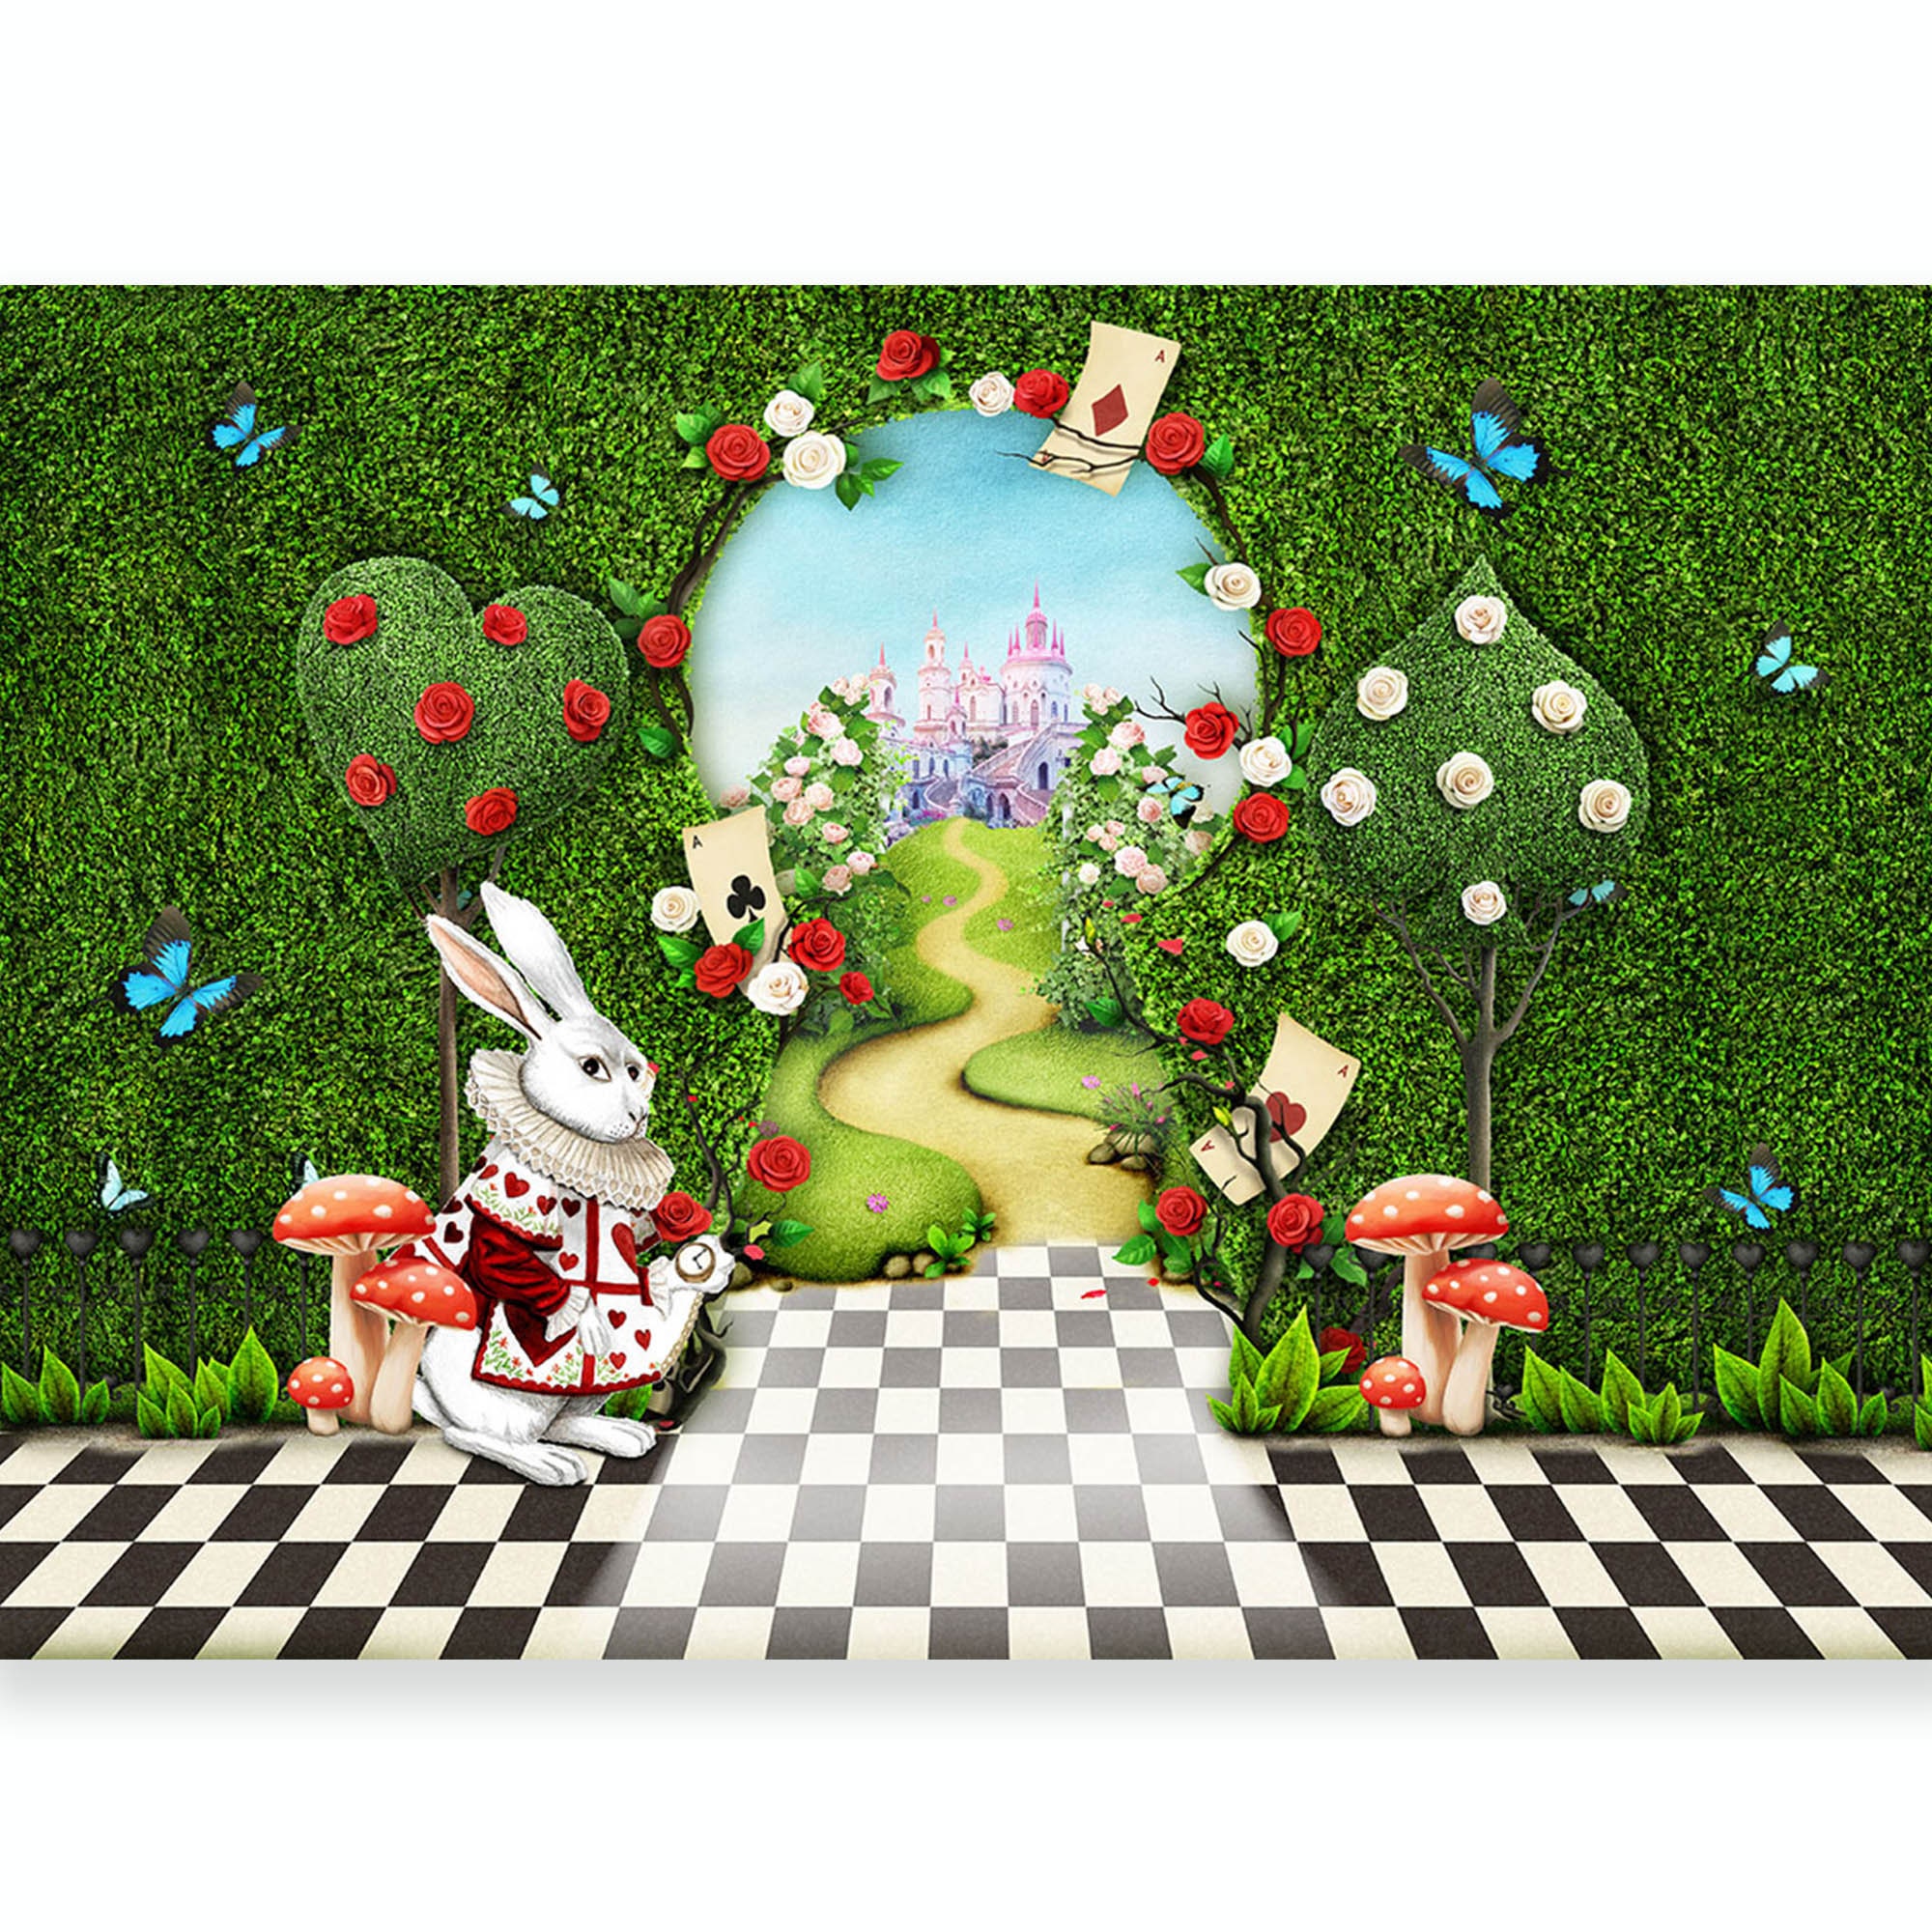 Dropship 1pc Wonderland Ornament Set, Hand Cast Stone Resin Statue Ornament,  Alice In Wonderland, For Outdoor Garden Yard Indoor Handicrafts to Sell  Online at a Lower Price